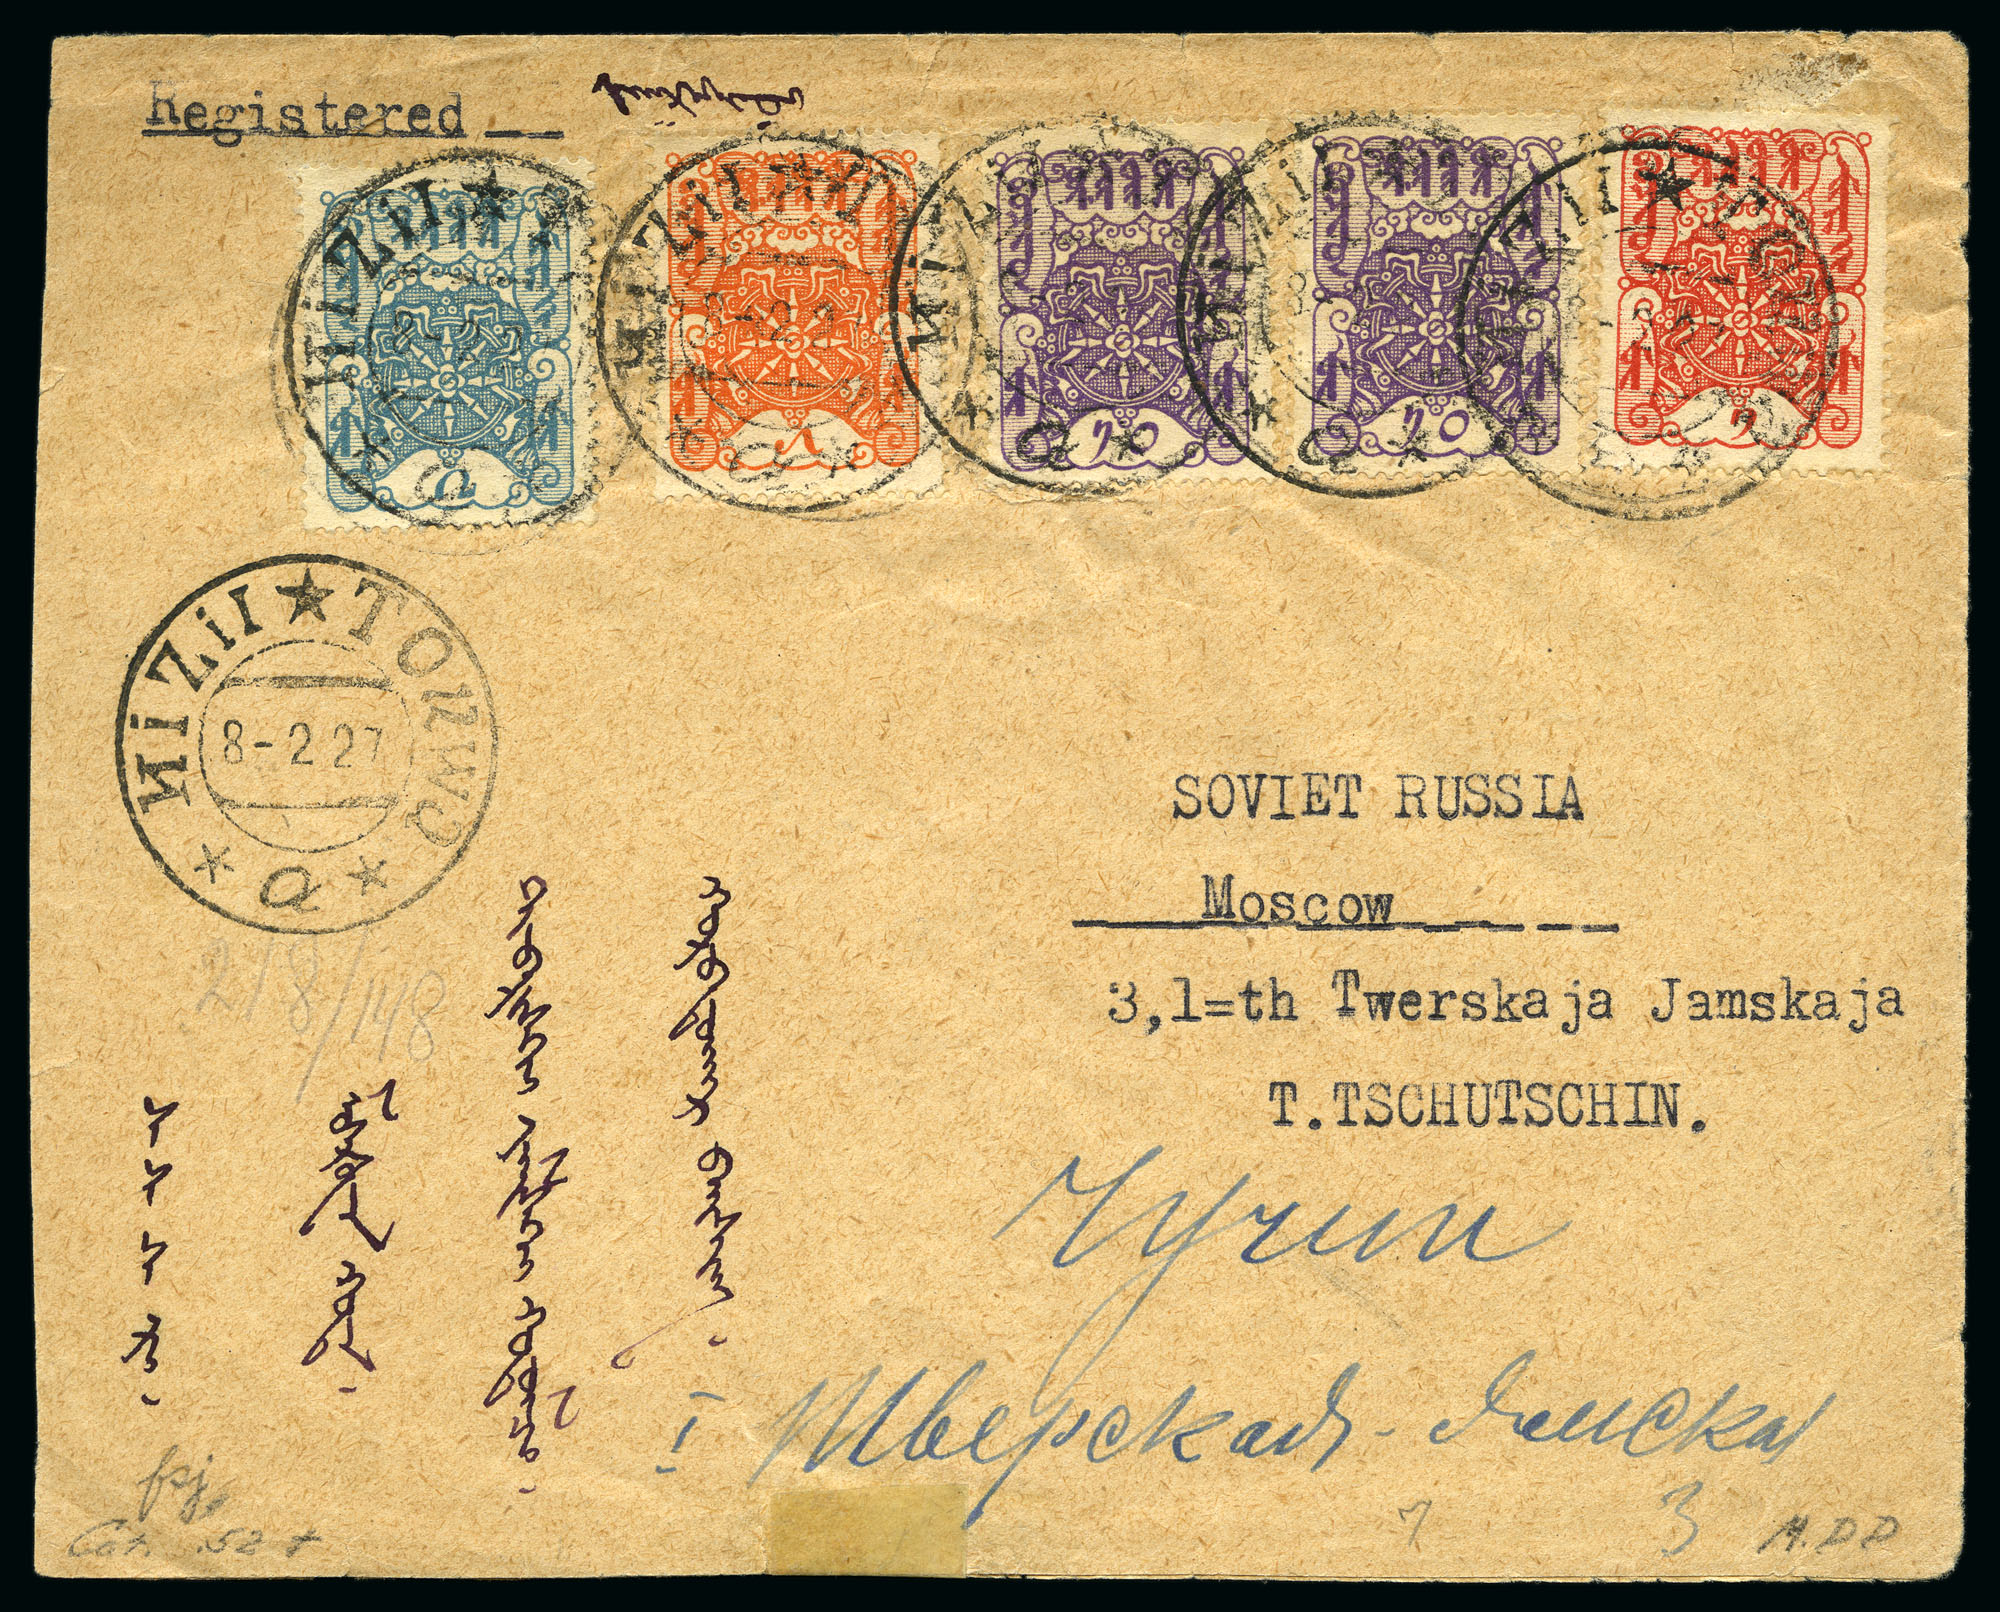 A nice 1927 cover from Kyzyl to Moscow.
Click this cover to see a larger version.